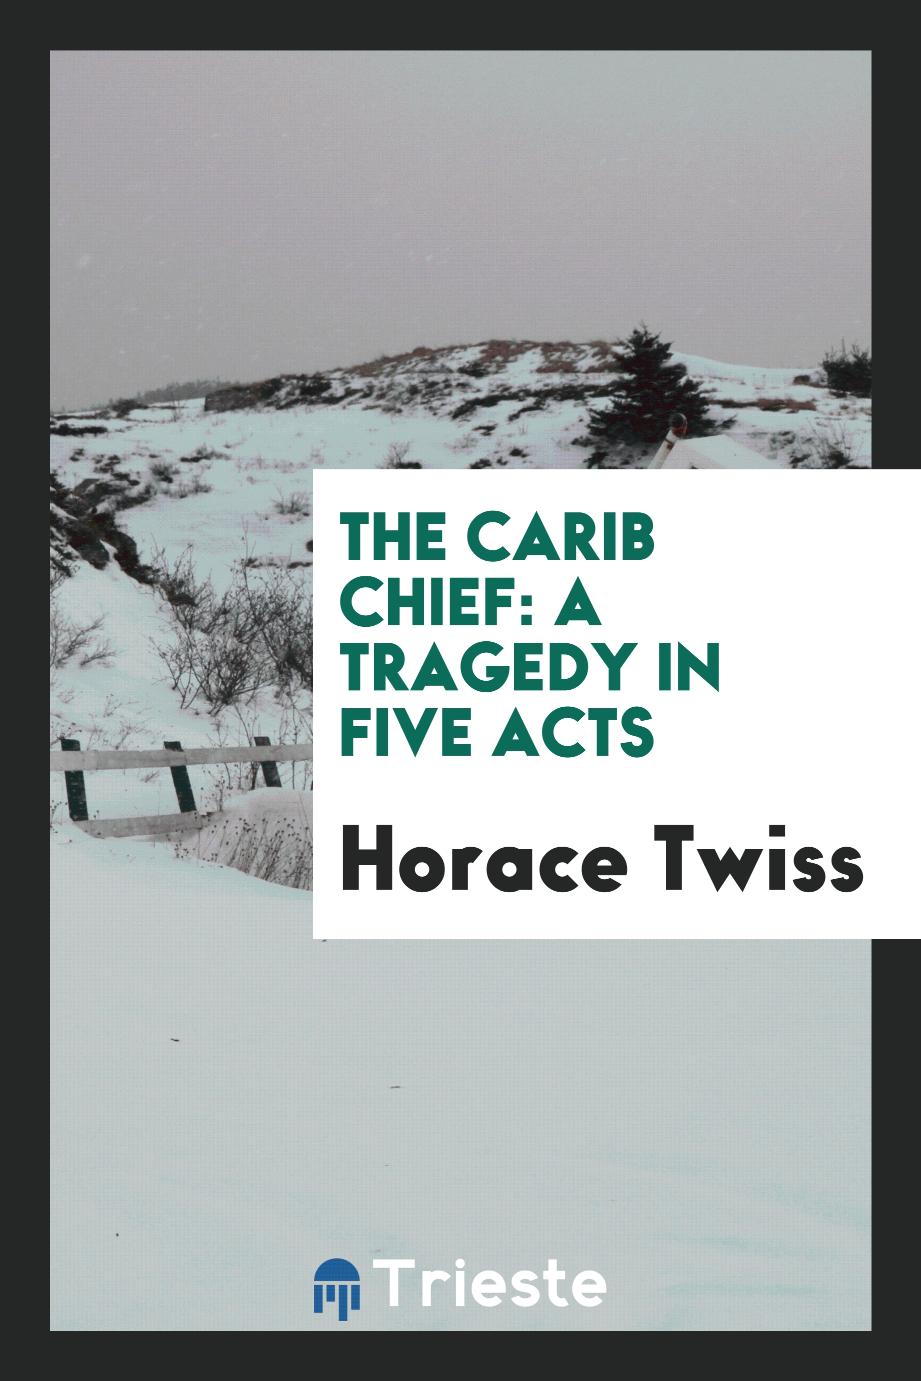 The Carib Chief: A Tragedy in Five Acts